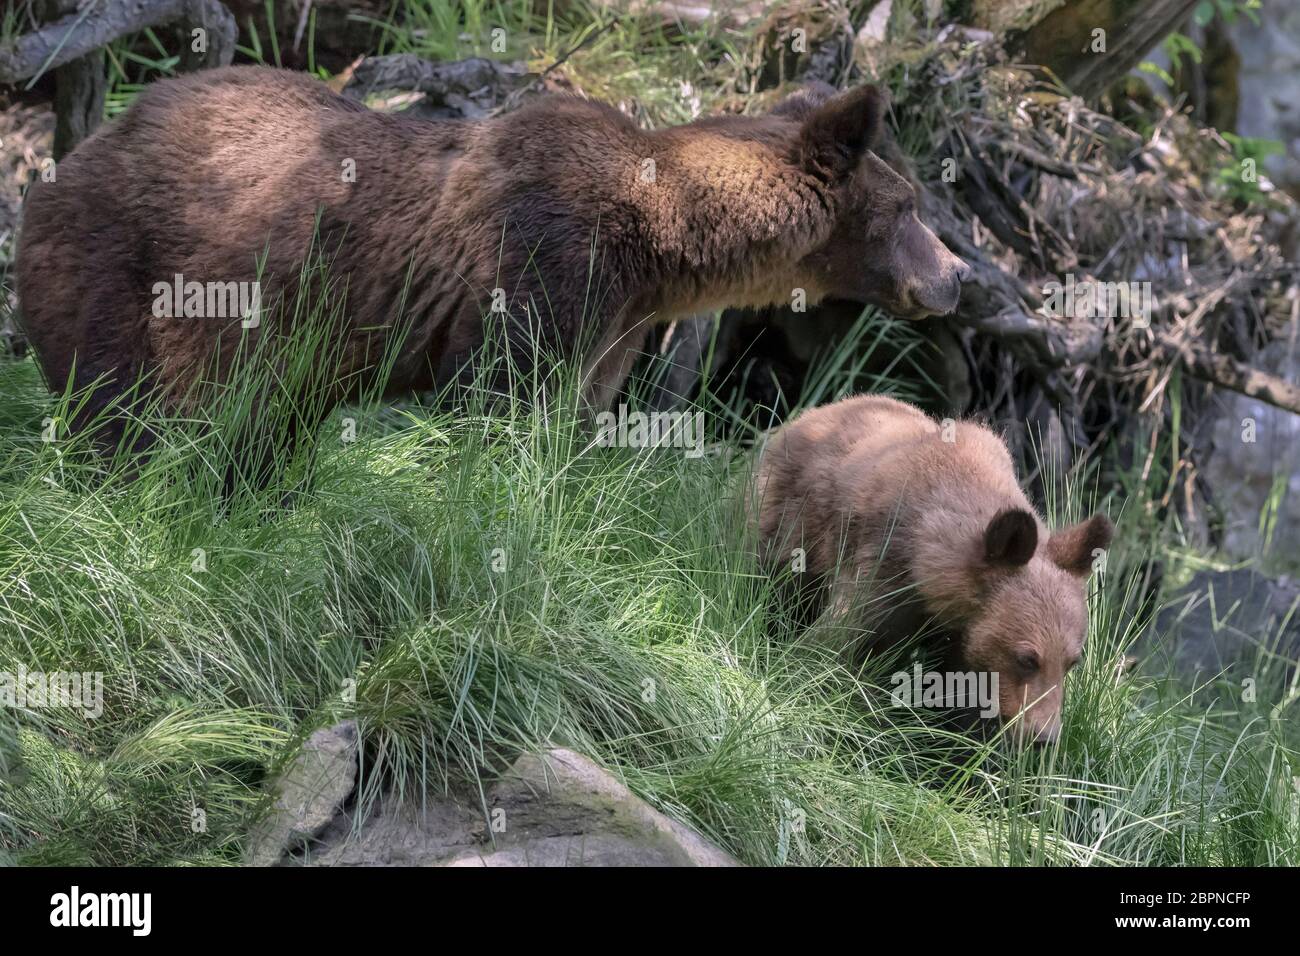 Mother grizzly and cub in dappled light in the forest, Khutzeymateen Inlet, BC Stock Photo